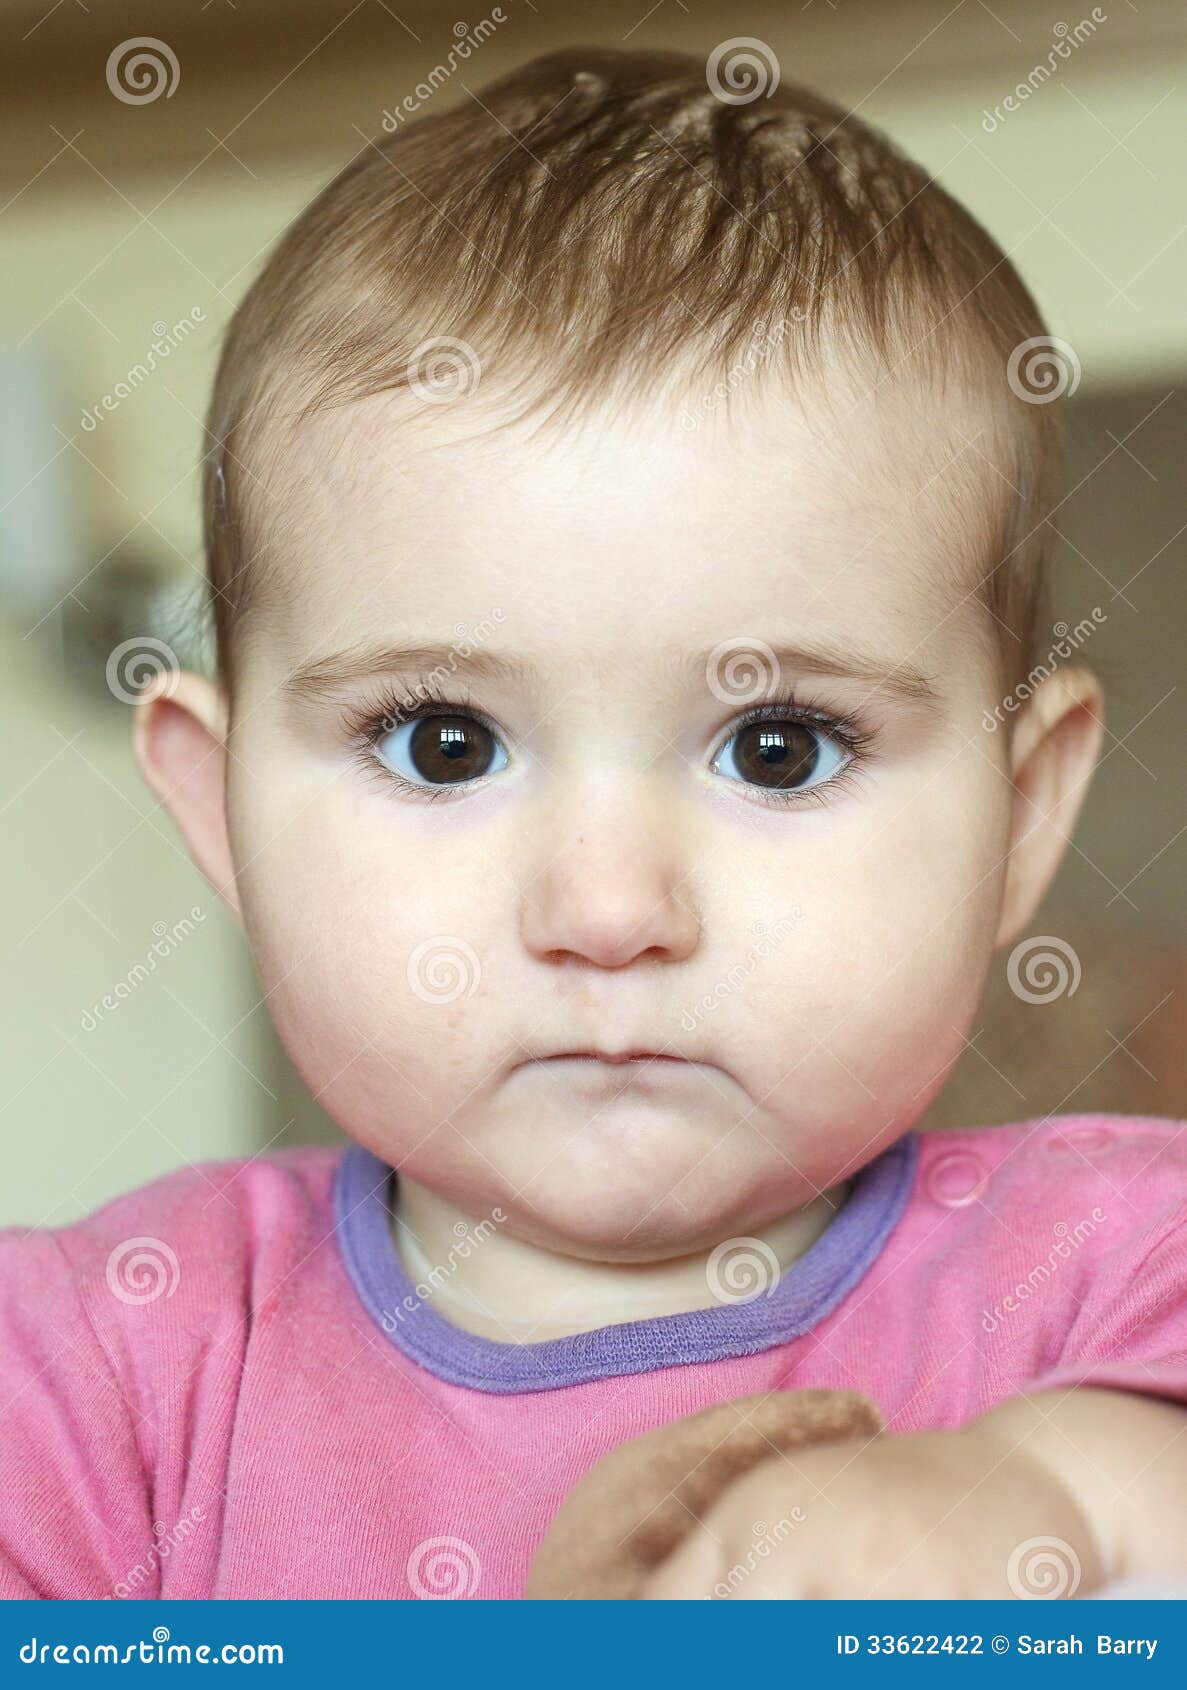 Young Baby Head And Shoulders Shot With Great Expression On Her